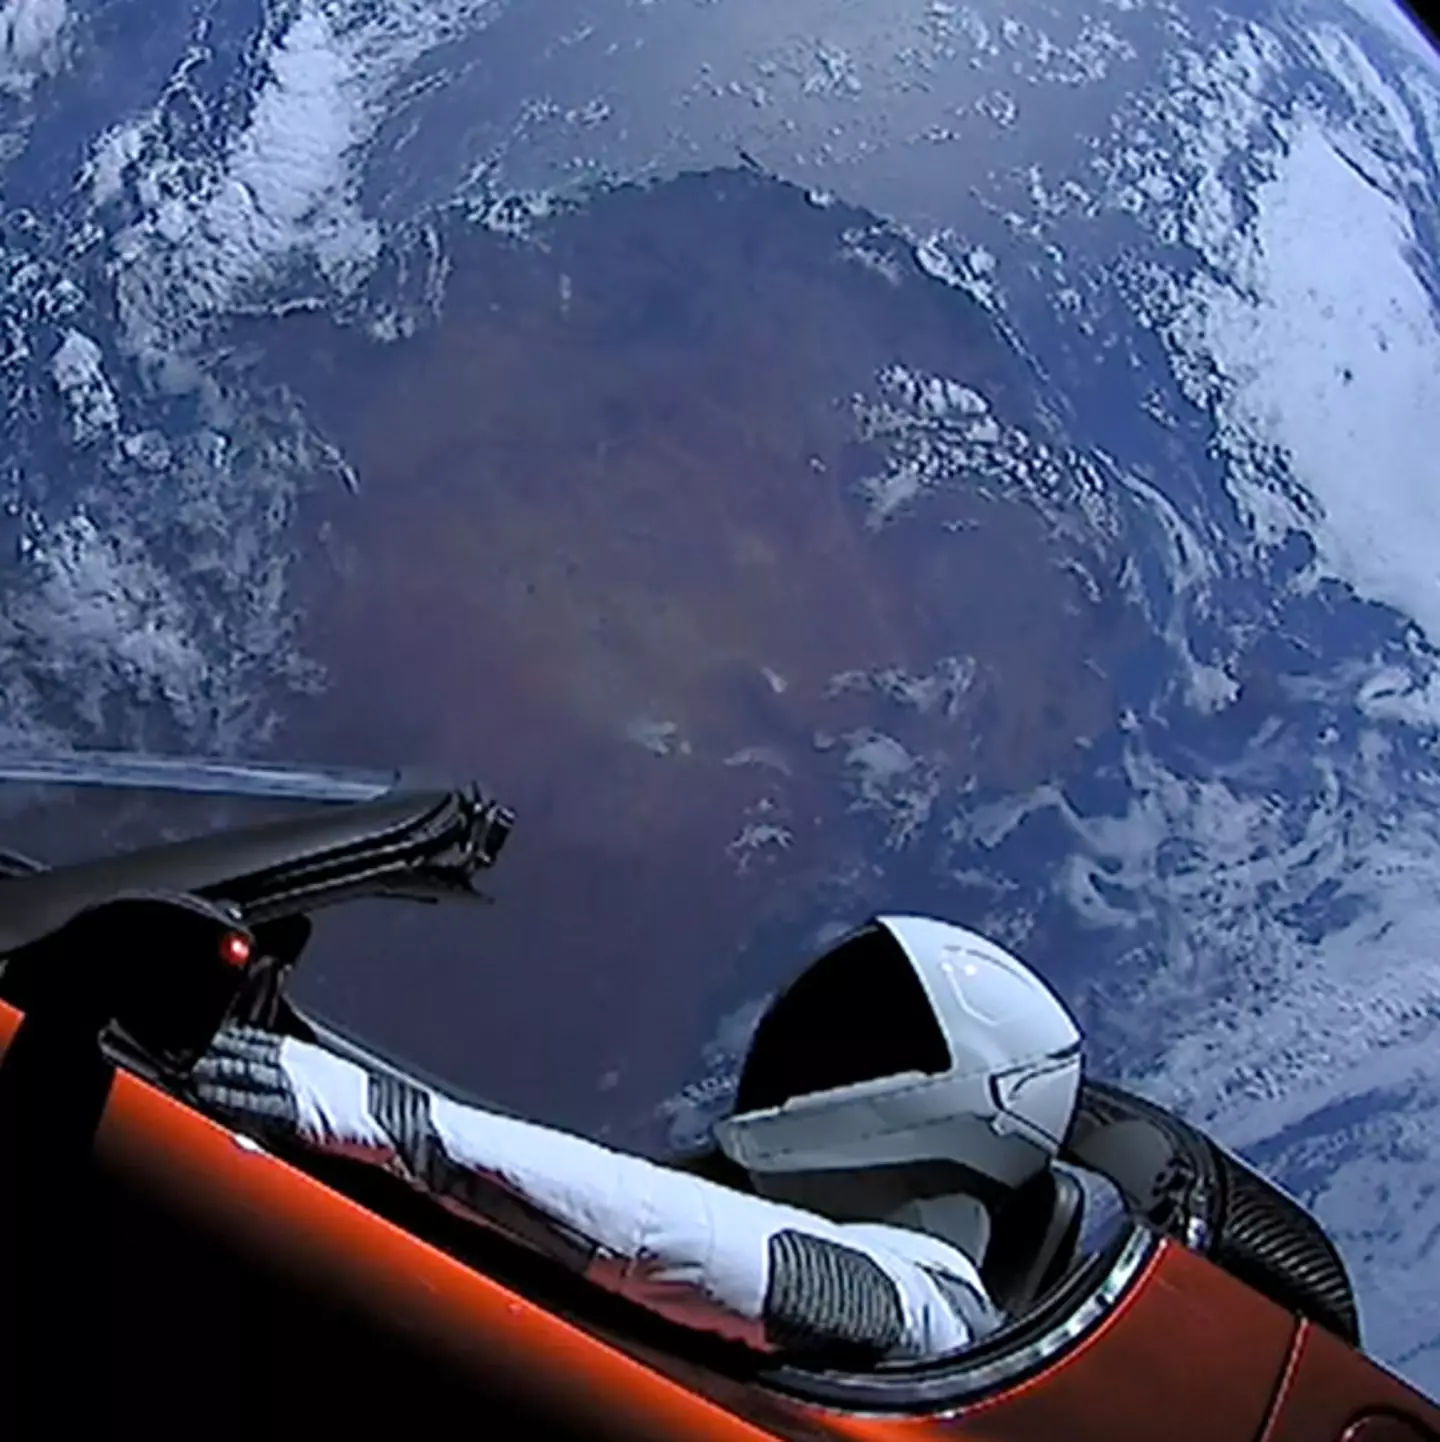 These are the chances of Elon Musk's space car hitting Earth in the next million years